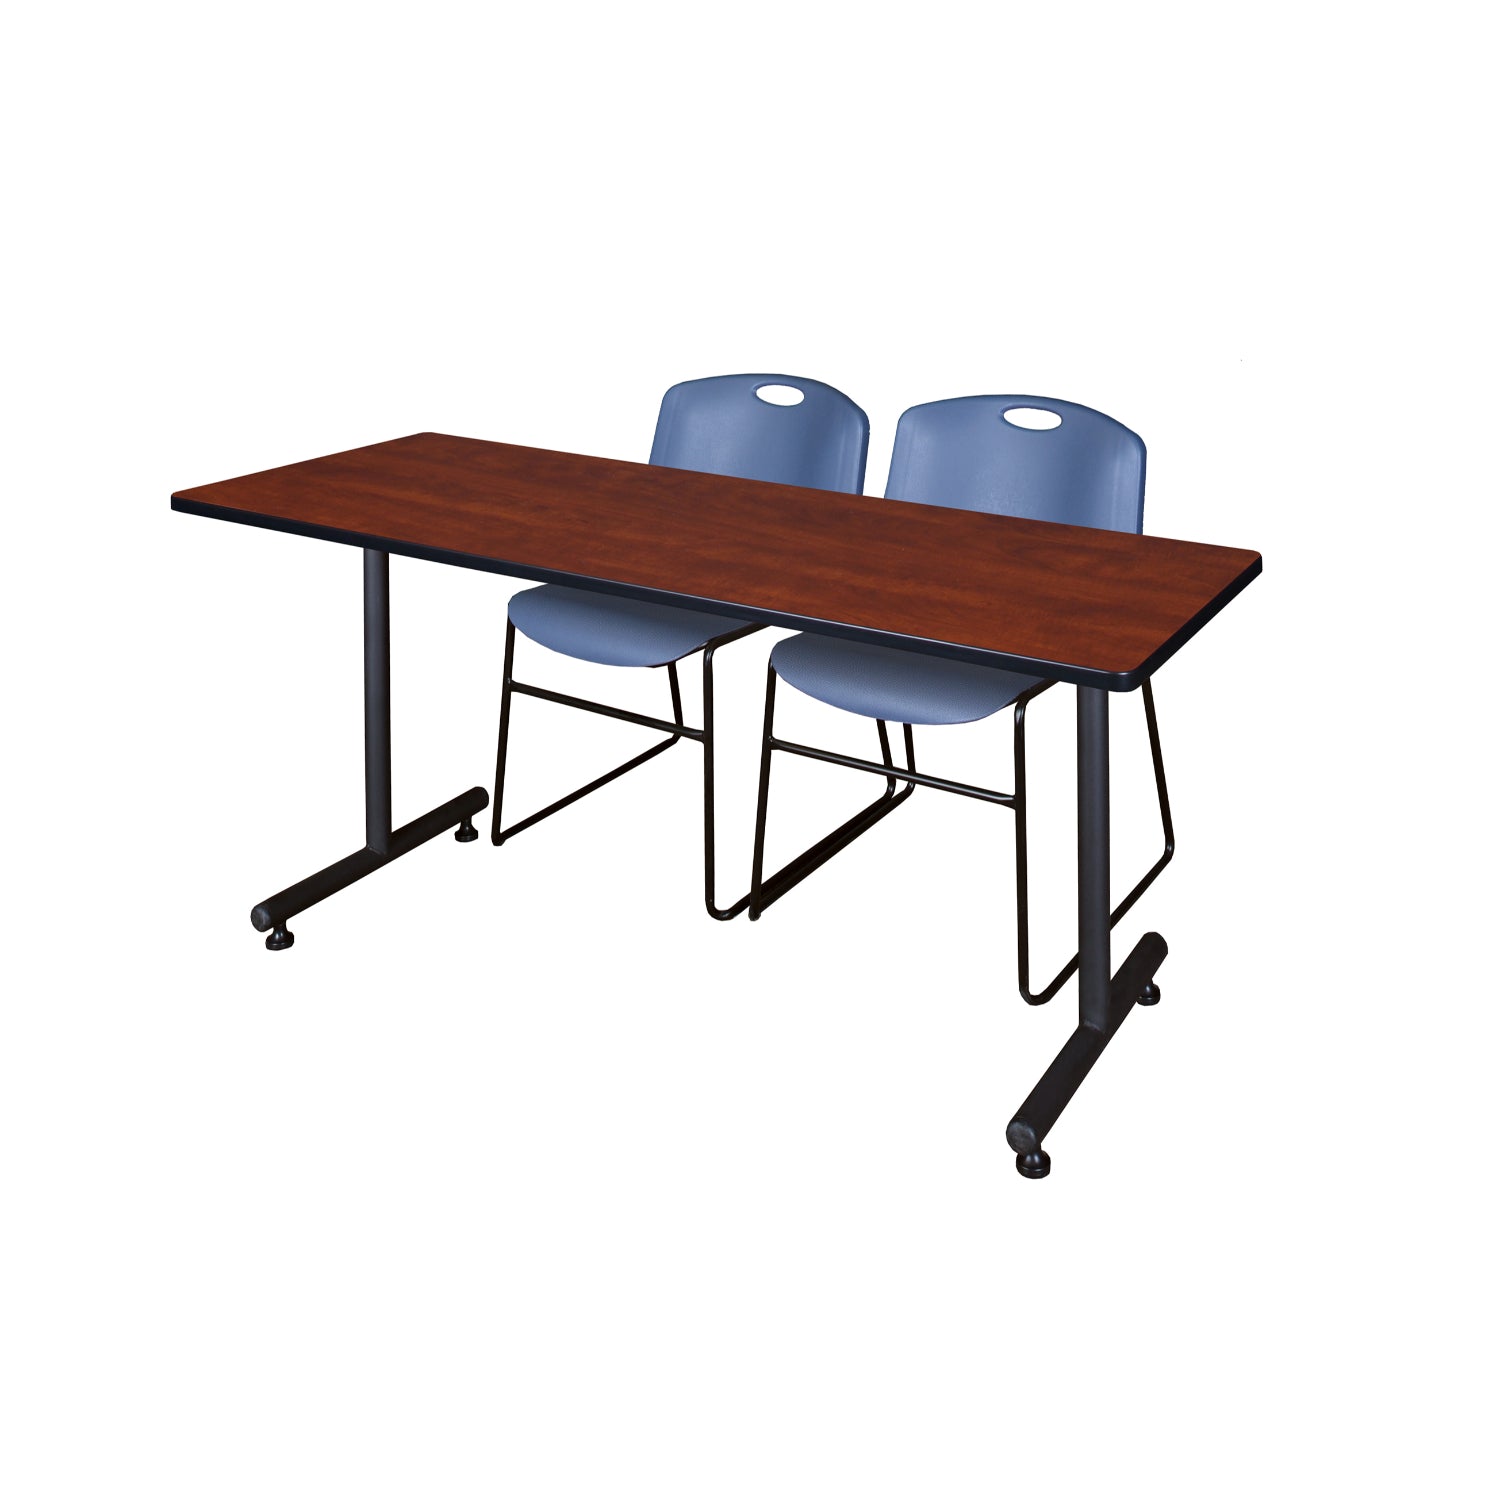 Kobe Training Table and Chair Package, Kobe 60" x 30" T-Base Training/Seminar Table with 2 Zeng Stack Chairs